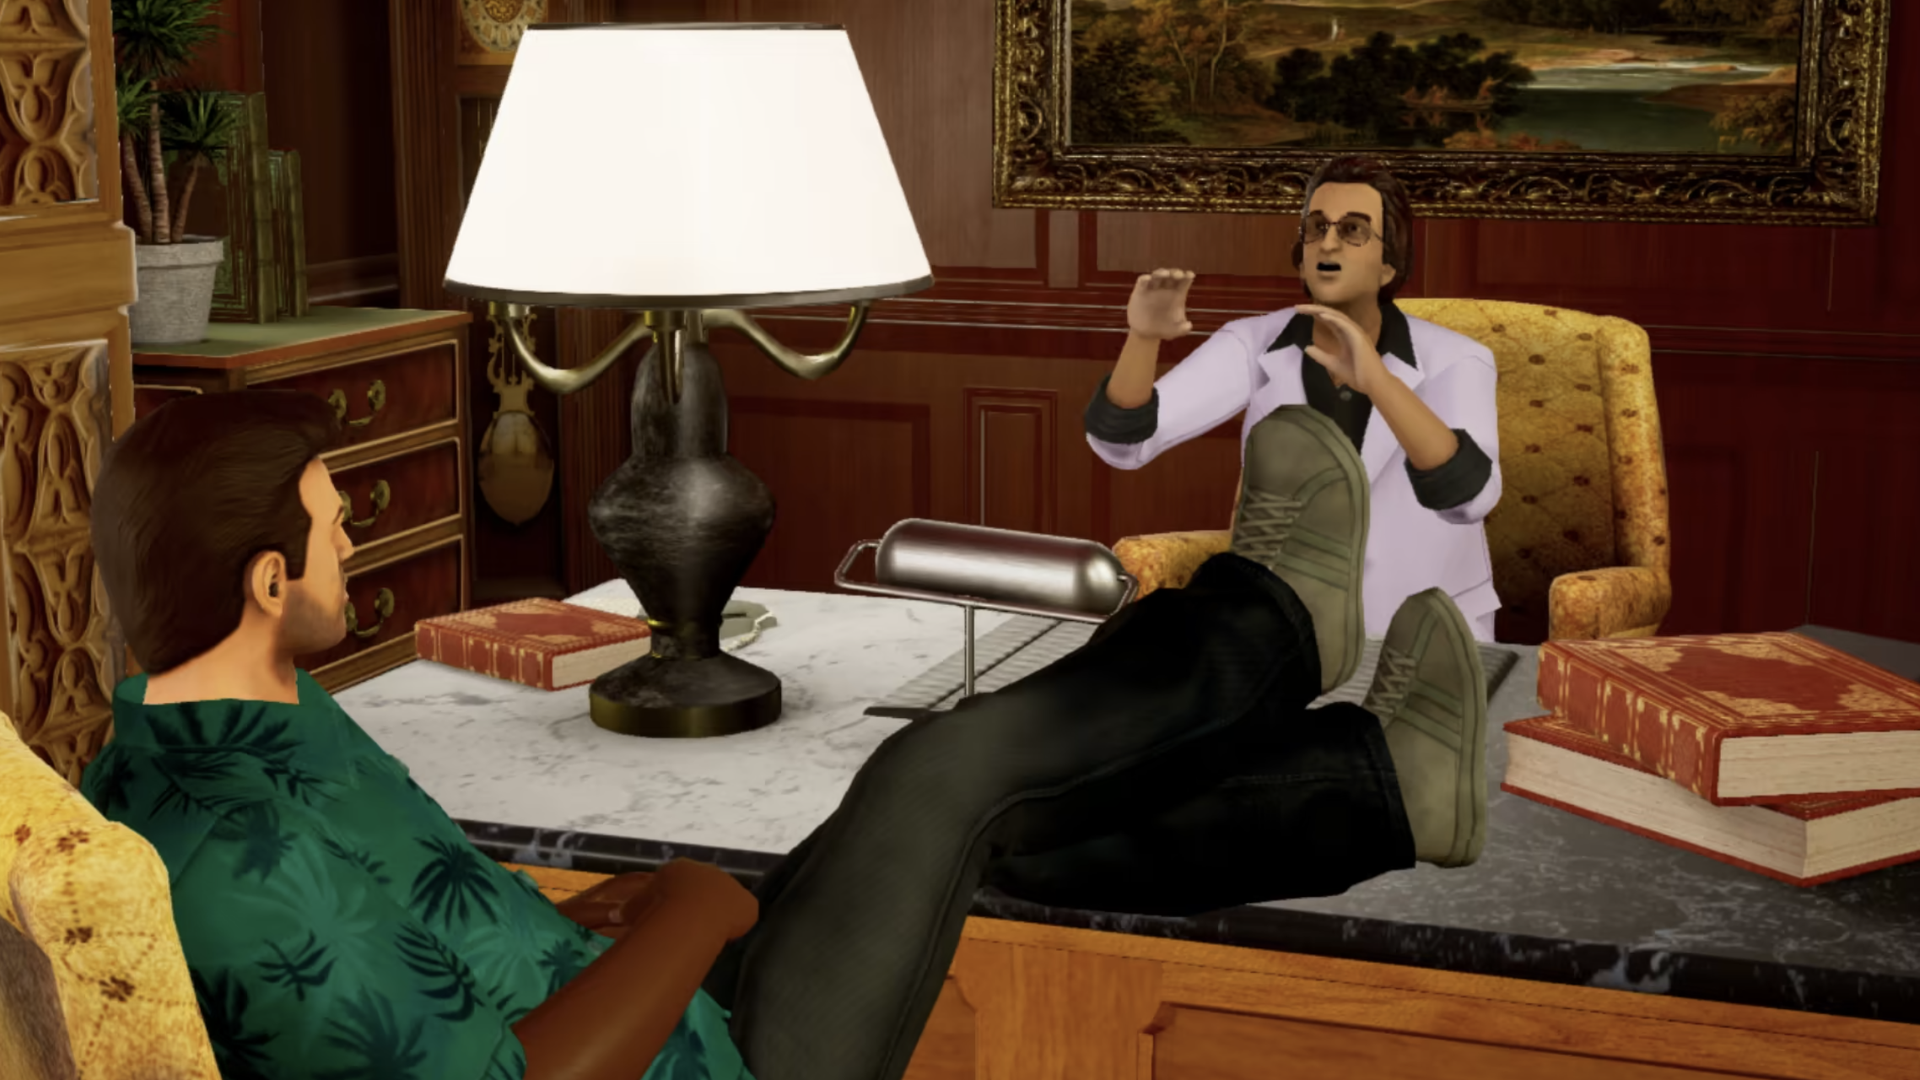 Video game screenshot of a man in a Hawaiian shirt putting his feet up on the desk of a man in a pink suit who is waving his hands